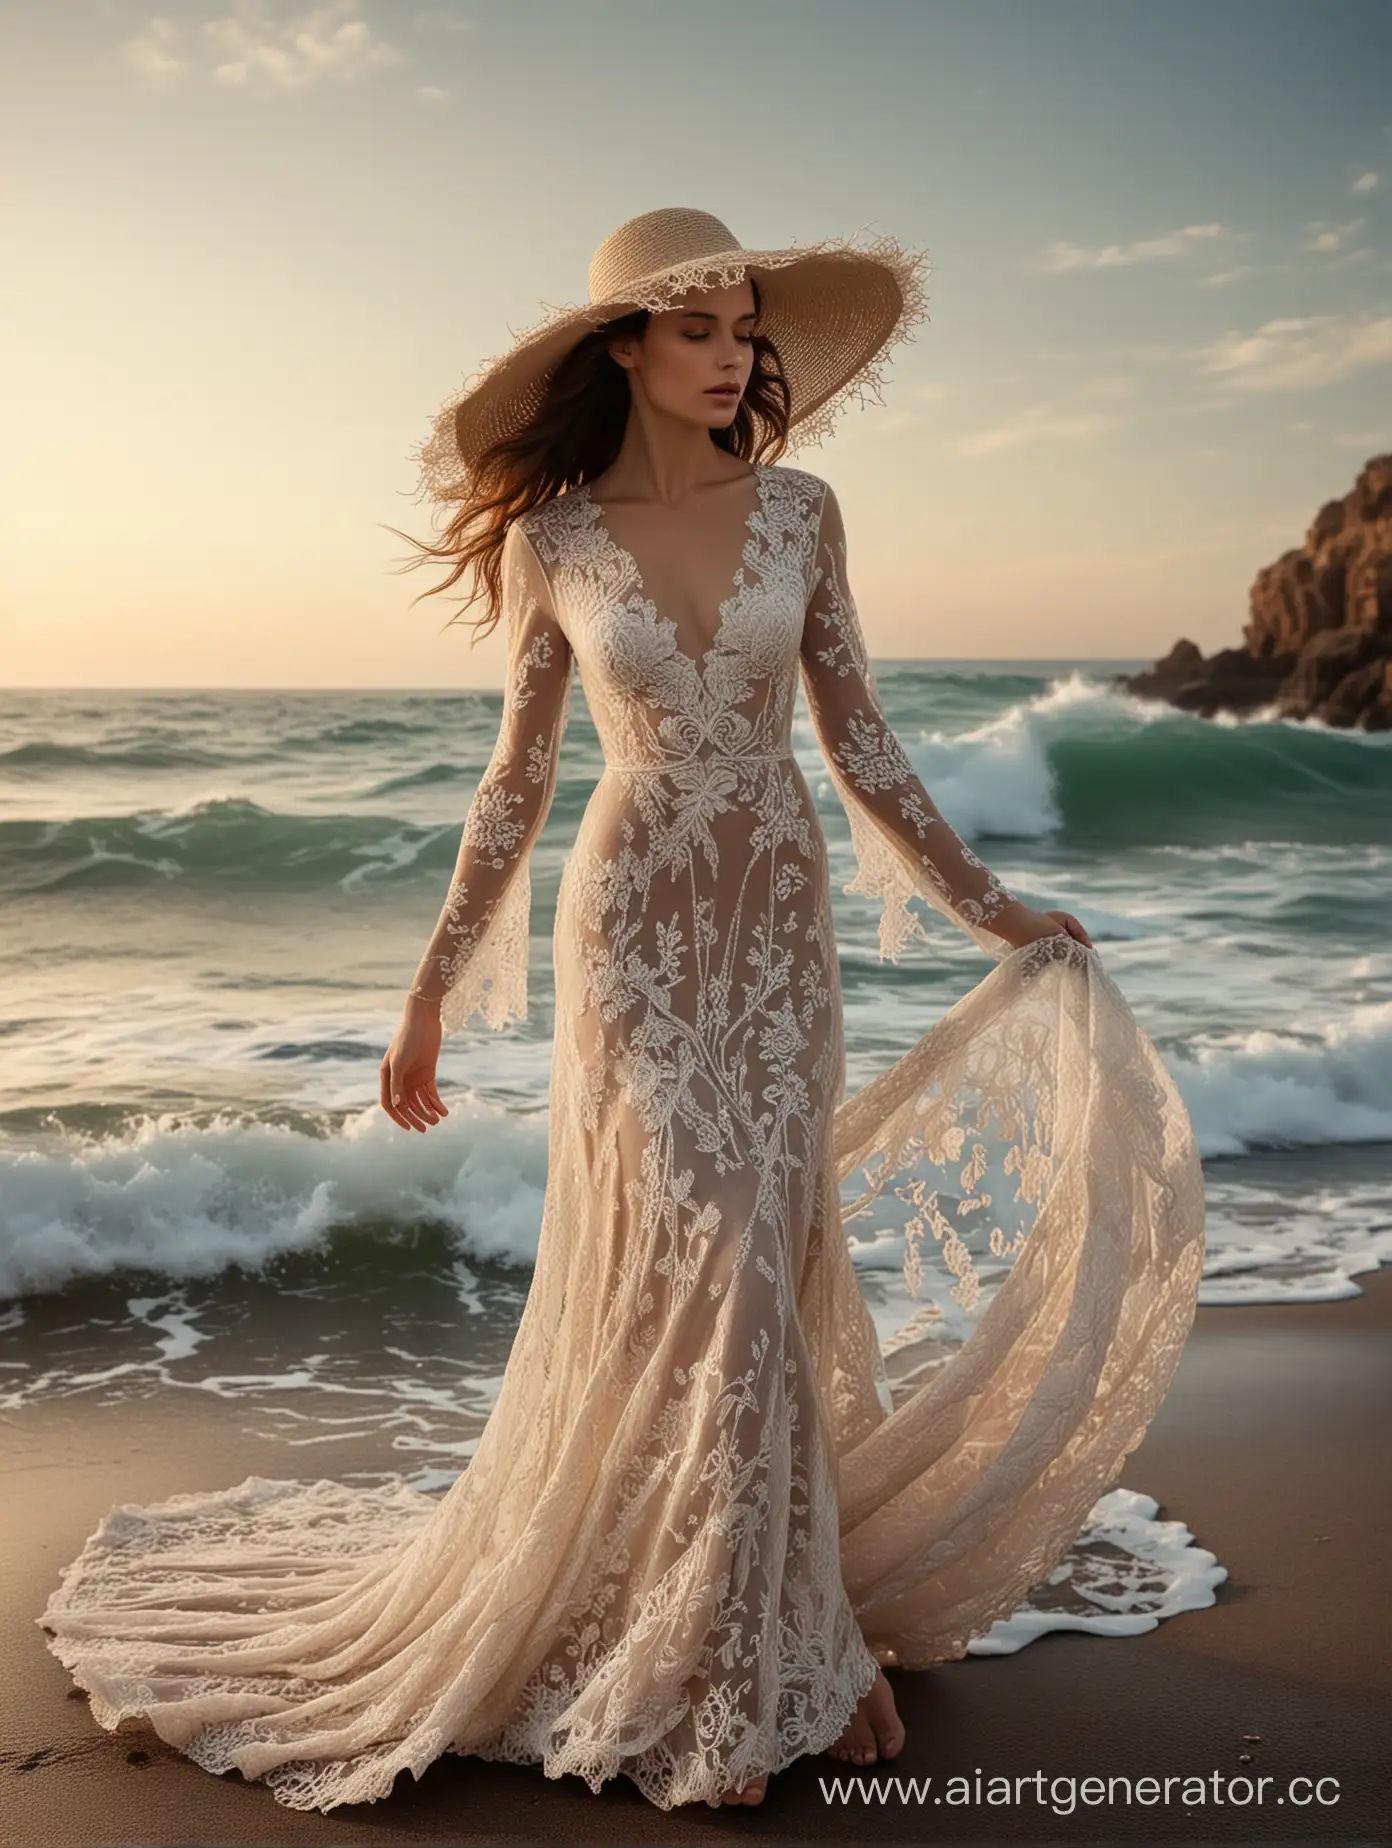 on the ocean shore, against the backdrop of a summer dawn, a beautiful model stands in a lace long dress and a wide-brimmed hat, in the style of Ellie Saab and Alessandro Sartori, the dress is blown by the wind, the ocean beats picturesquely with waves, rocks, professional photo, luxury, bohemian, atmospheric, beautiful, Spanish lace, photo in the style of Annie Leibovitz